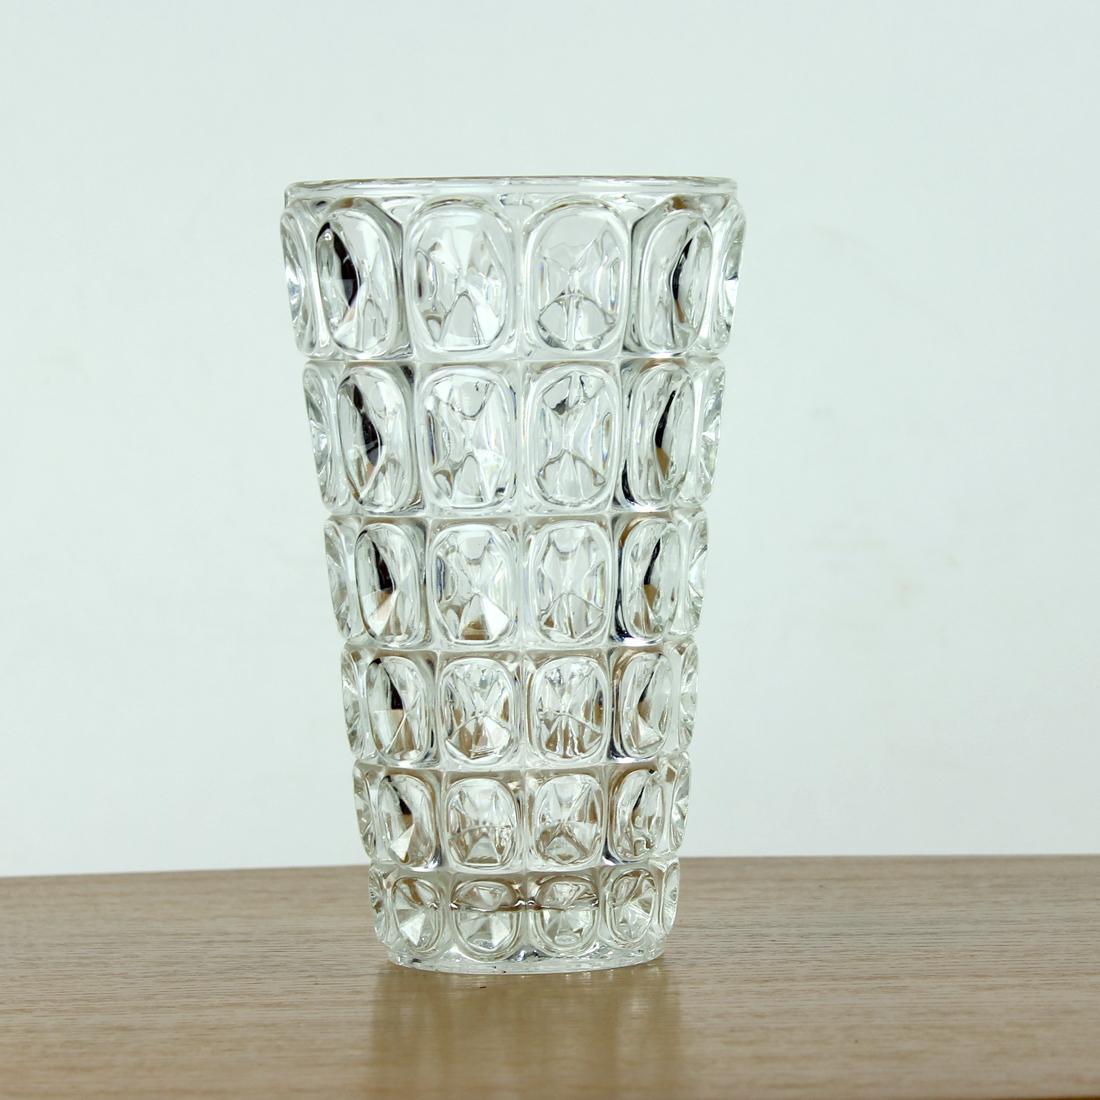 Beautiful glass vase in transparent pressed glass. Designed by František Pečený for Hermanova hut glass factory in 1963. Number of pattern 20040.
Frantisek Pečený was one of the most significant glass designers in 1960s in Czechoslovakia. He was